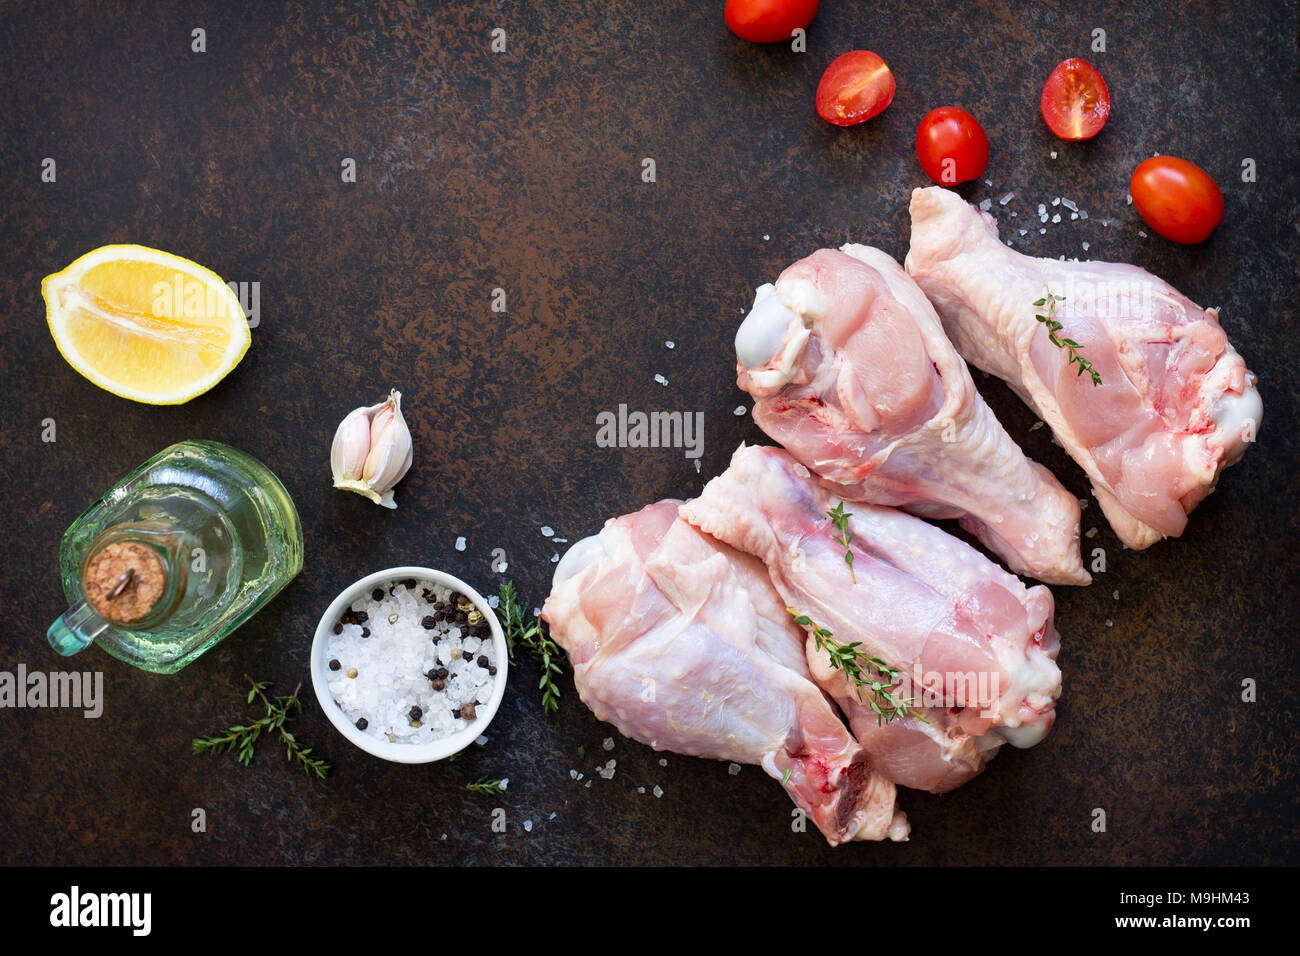 Fresh meat. Raw turkey shin and spices on a stone table. Copy space. Stock Photo